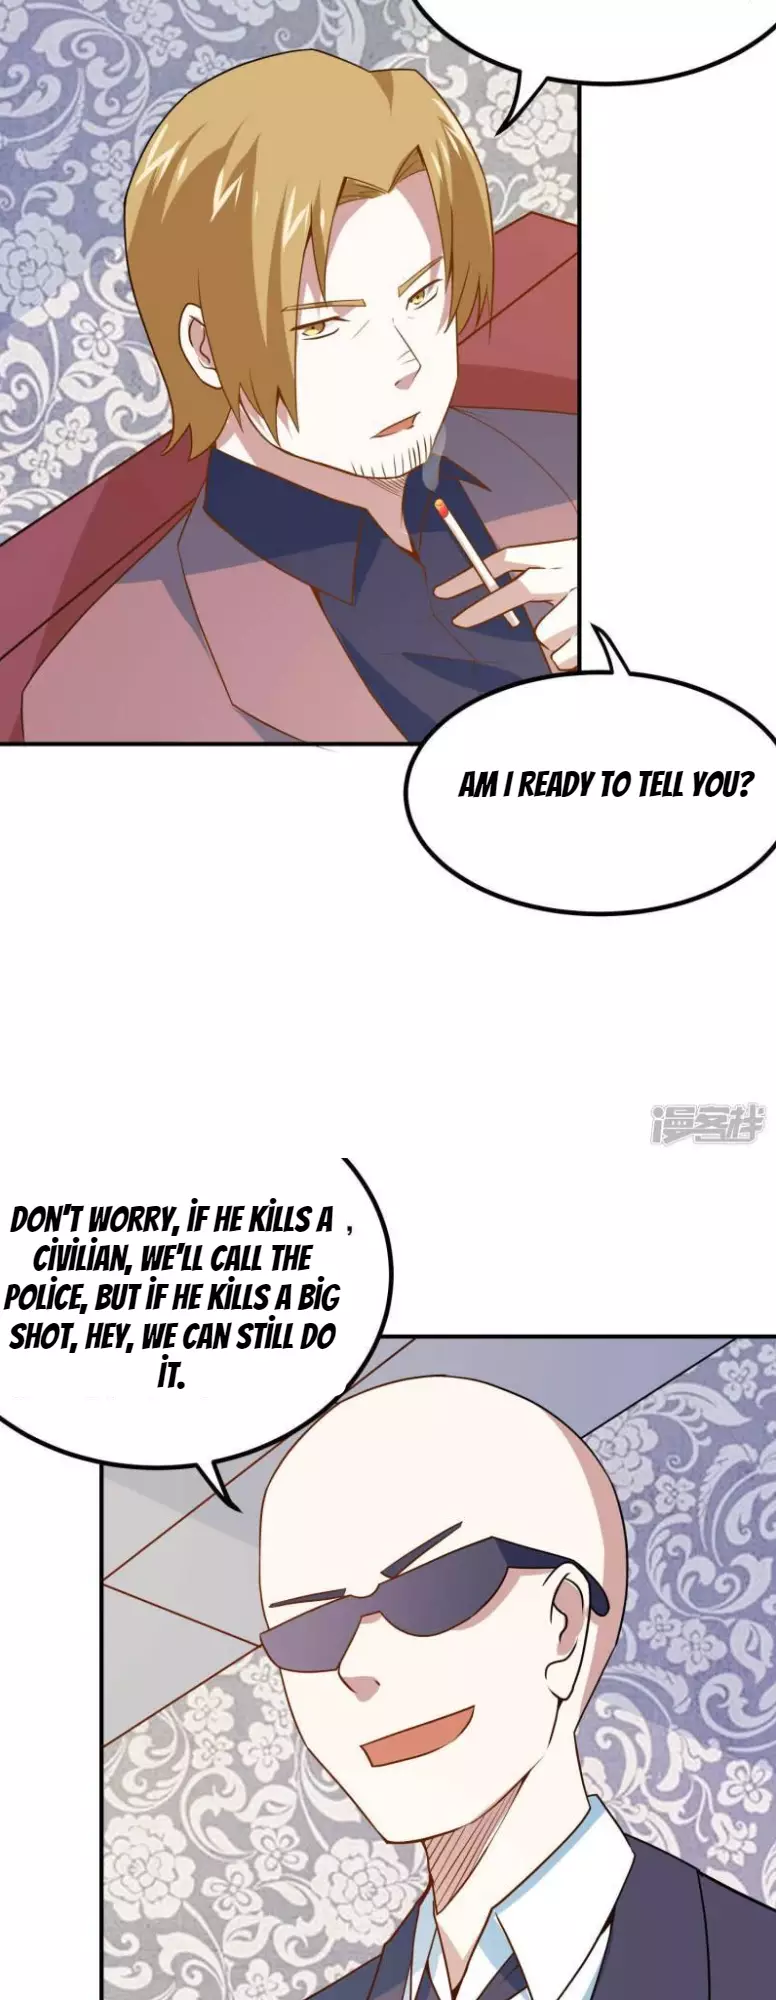 Godly Mobile Game - 45 page 4-8339ddd2